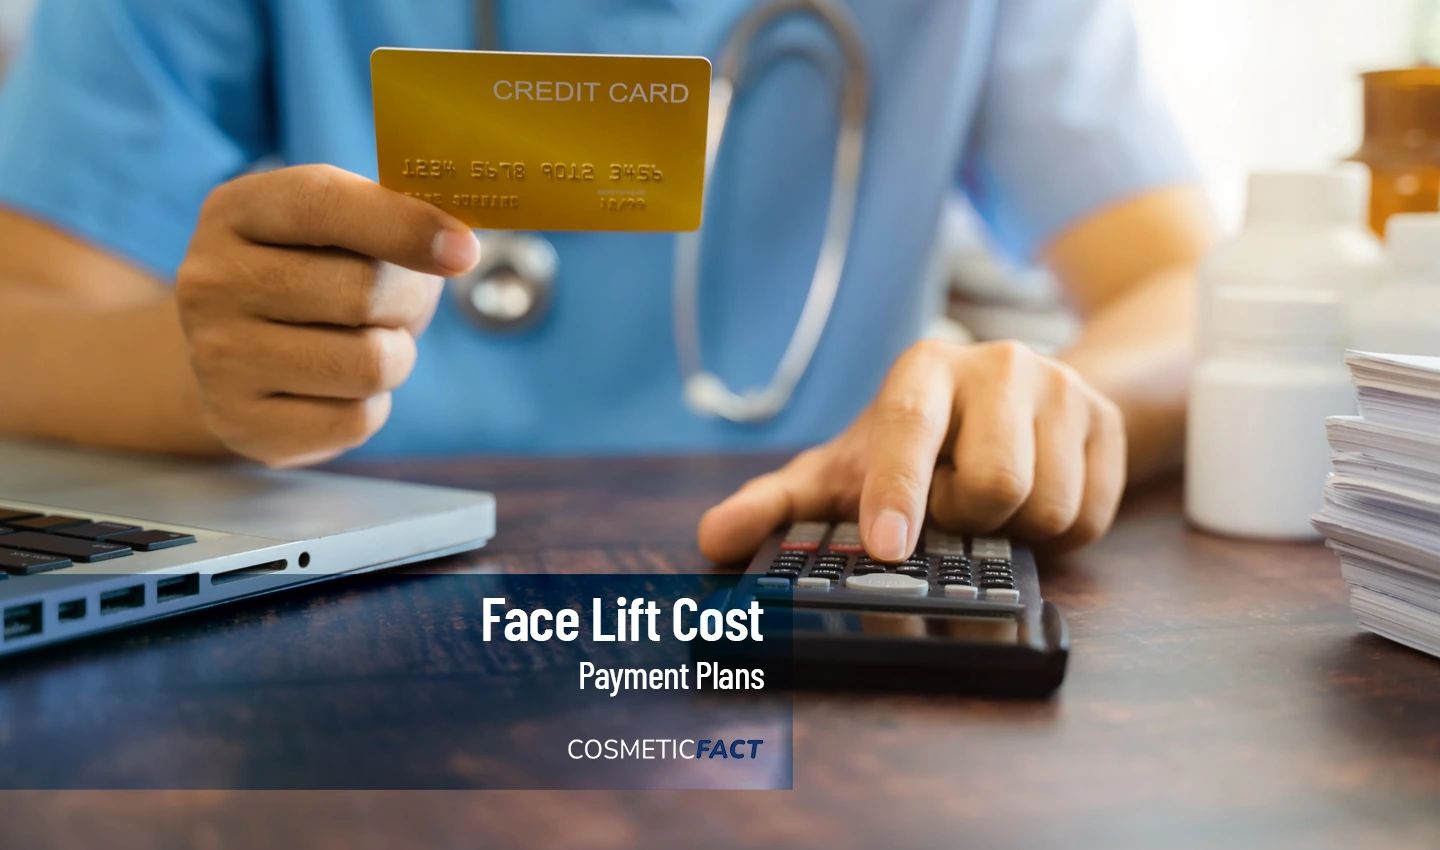 A person holding a calculator and a credit card, exploring facelift surgery financing options.